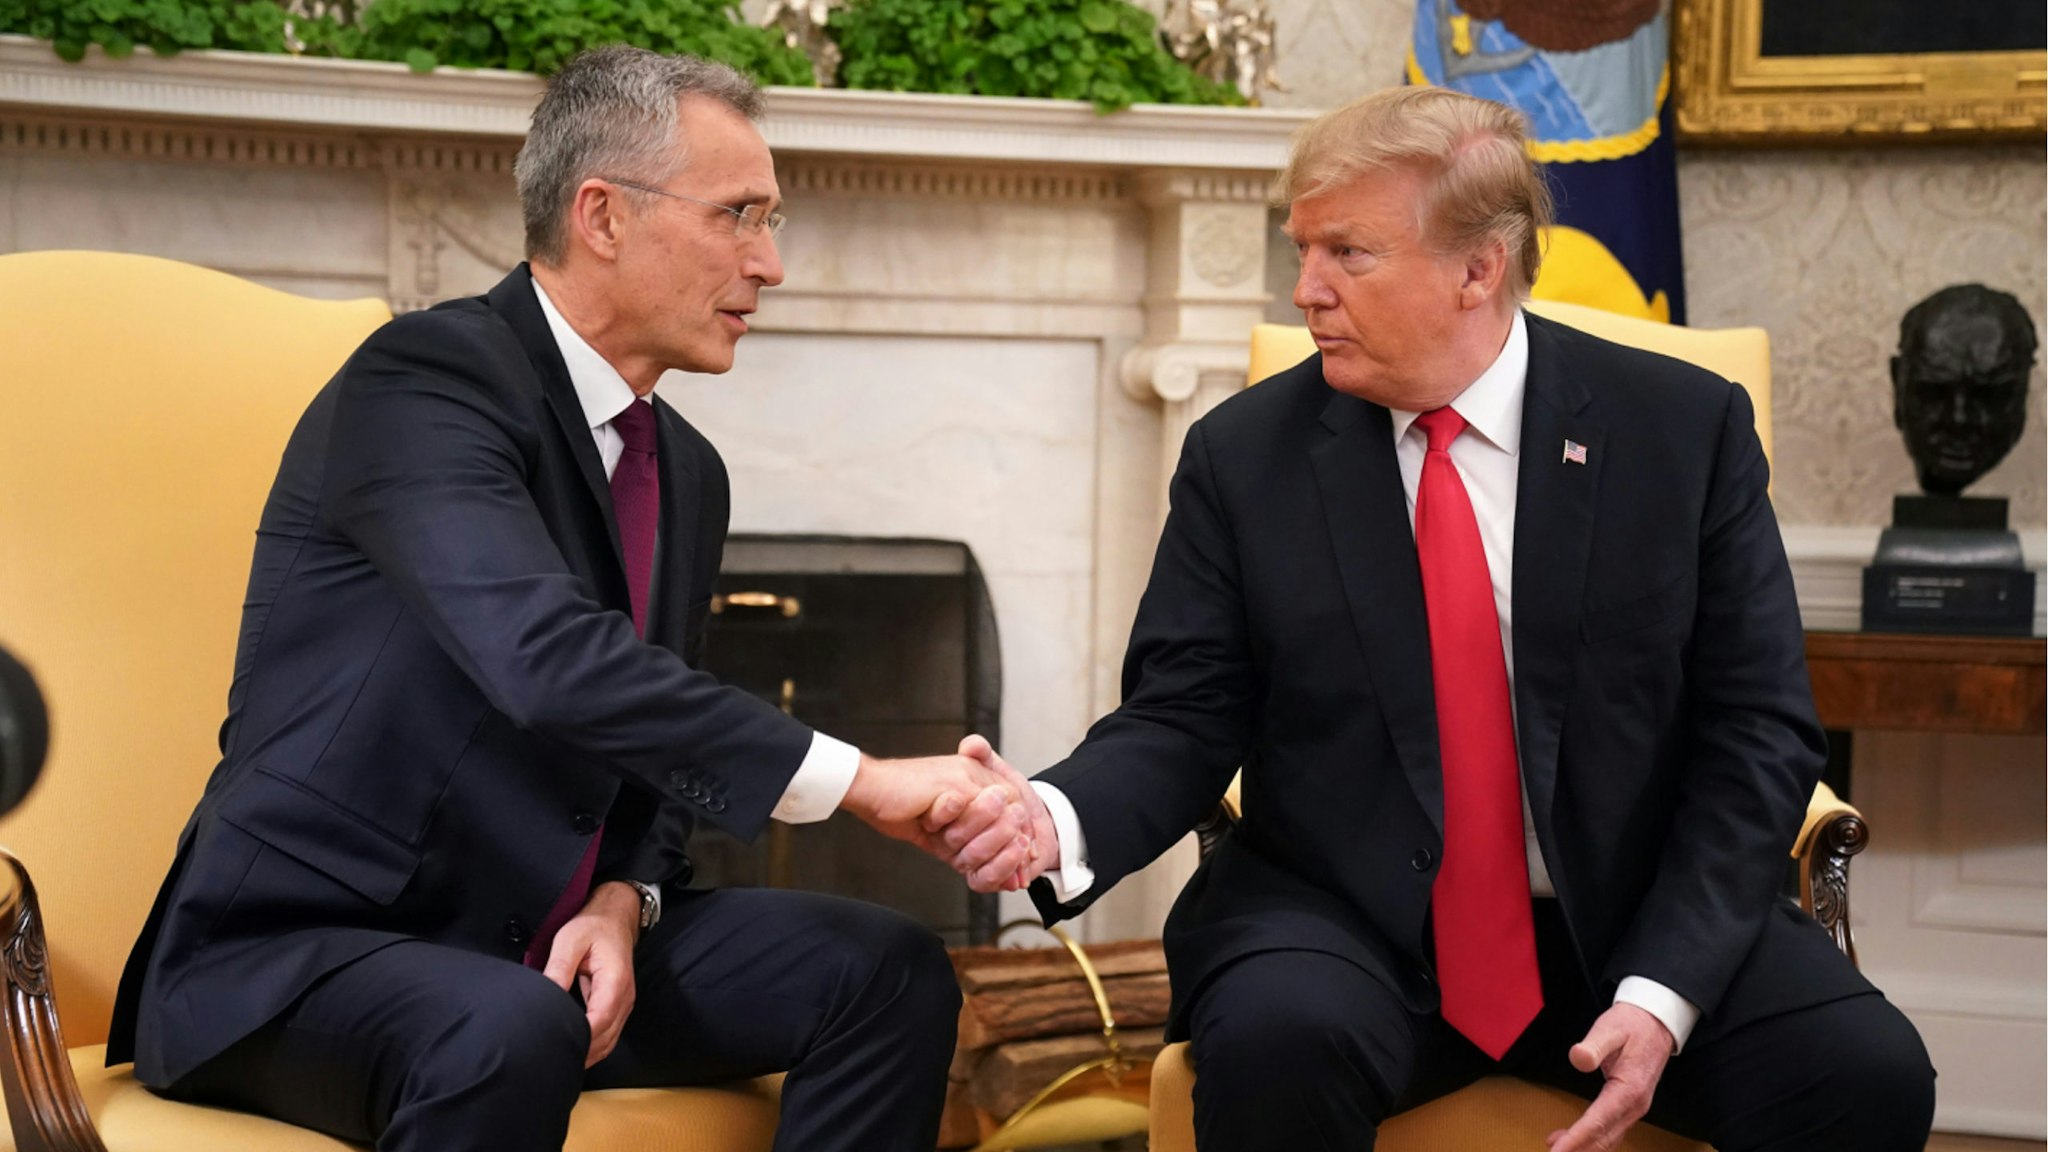 NATO Secretary General Jens Stoltenberg (L) and U.S. President Donald Trump shake hands in the Oval Office at the White House April 02, 2019 in Washington, DC.